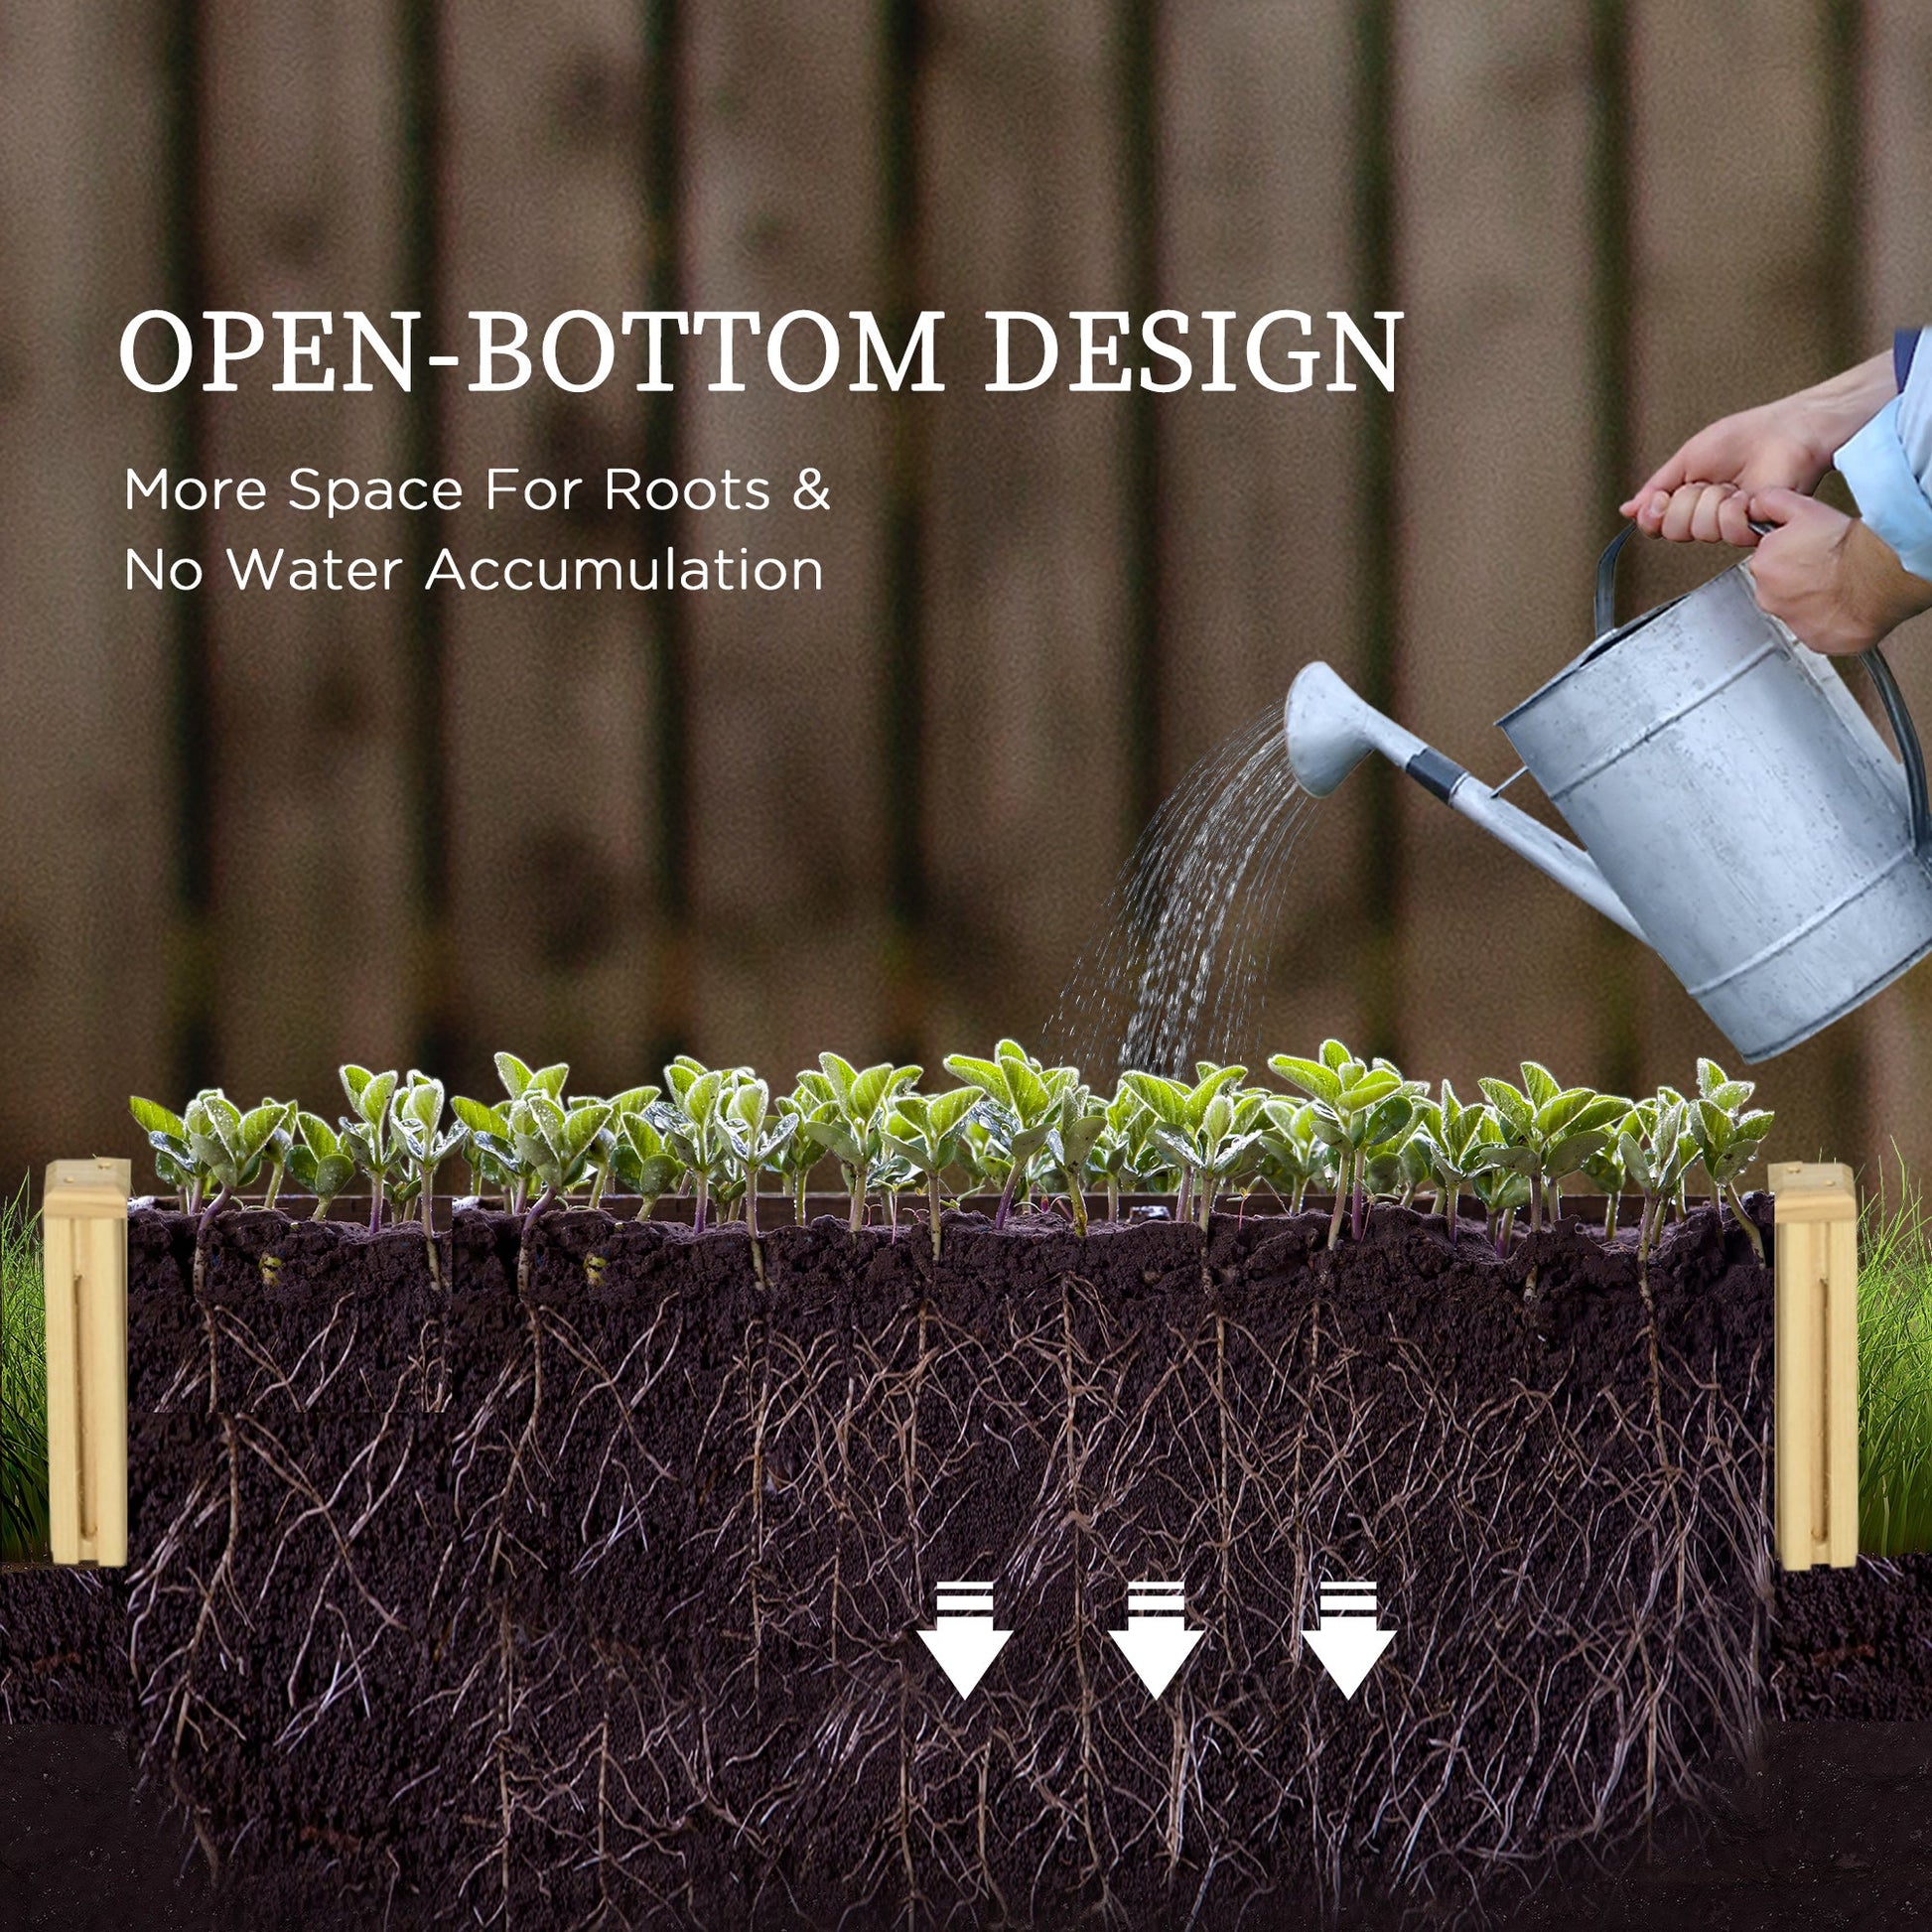 DIY Five-box Raised Garden Bed, Wooden Planter Boxes for Vegetables, Flowers, Herbs, Easy Assembly at Gallery Canada